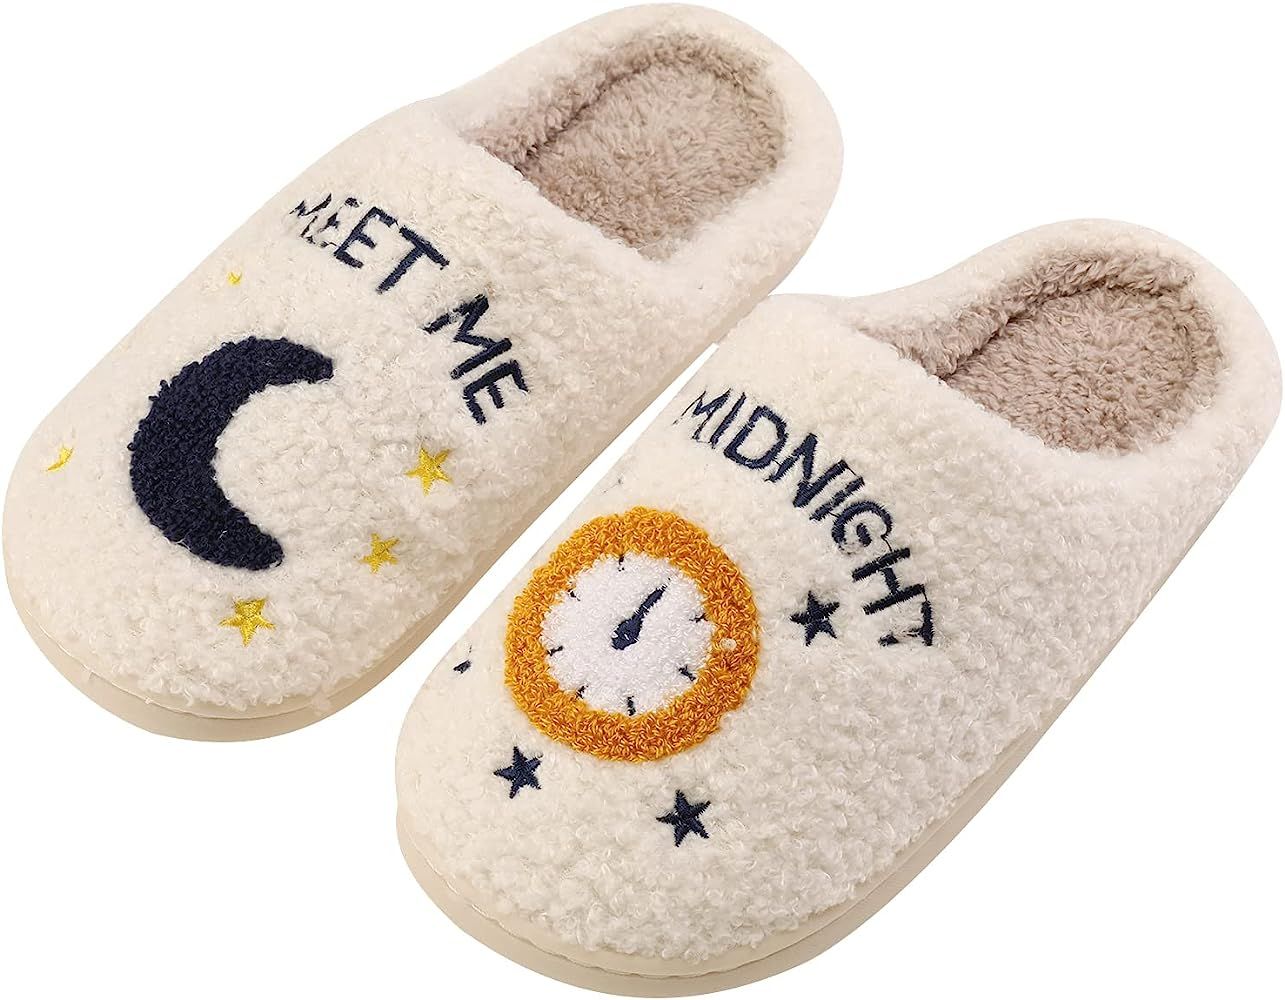 Qubuwalk Meet Me at Midnight Merch Soft Plush Fuzzy Slippers Warm Cozy House Slippers for Women M... | Amazon (US)